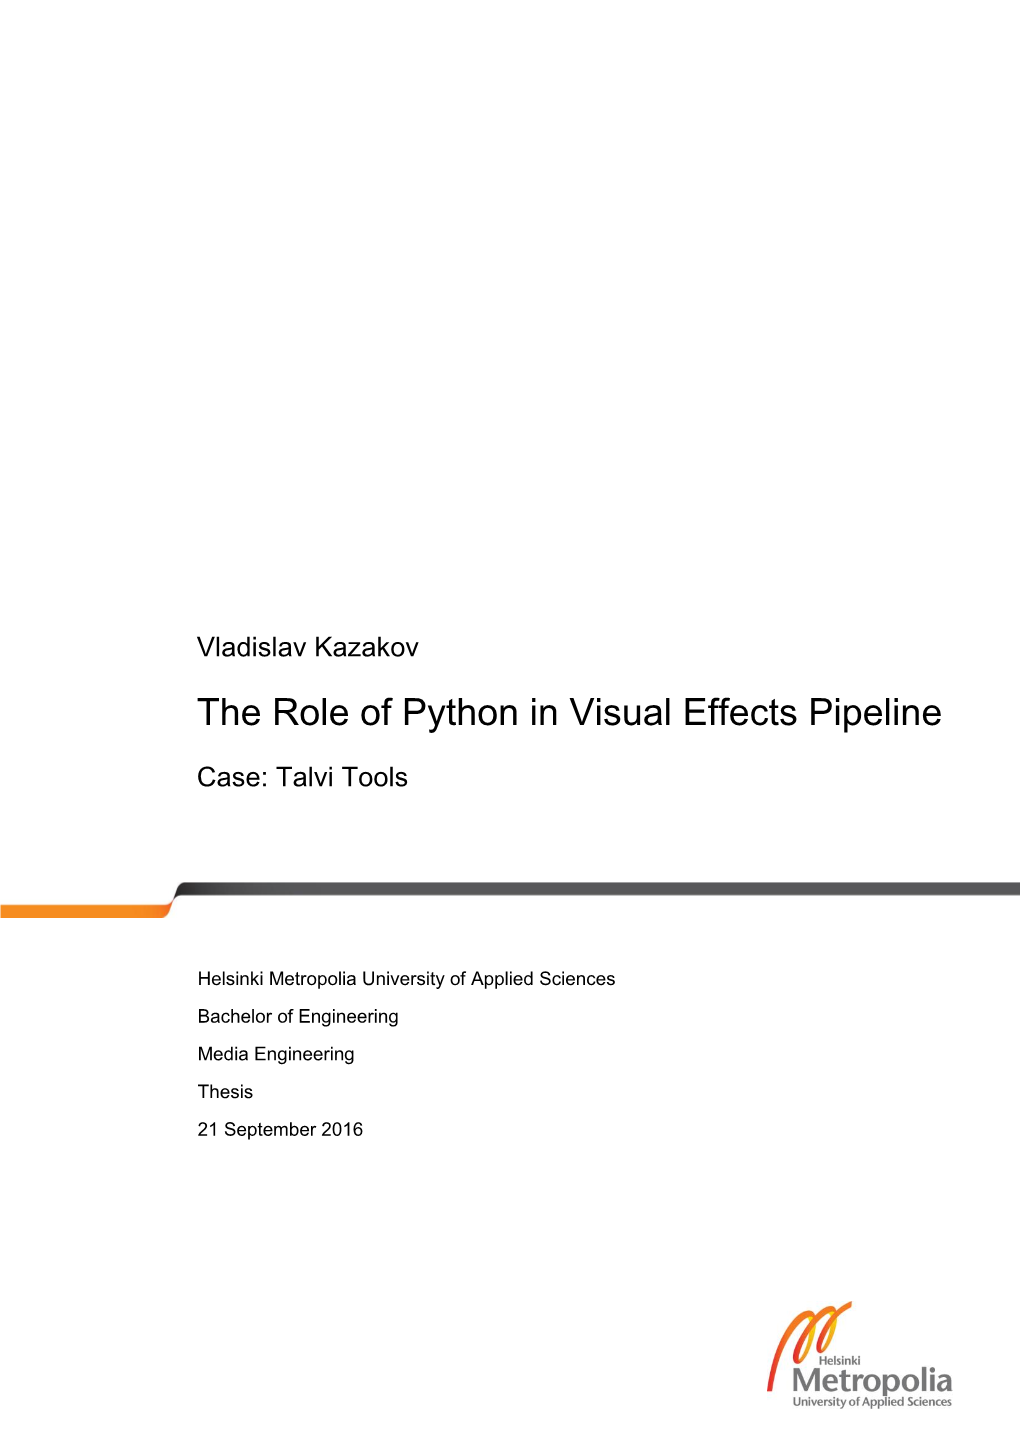 The Role of Python in Visual Effects Pipeline